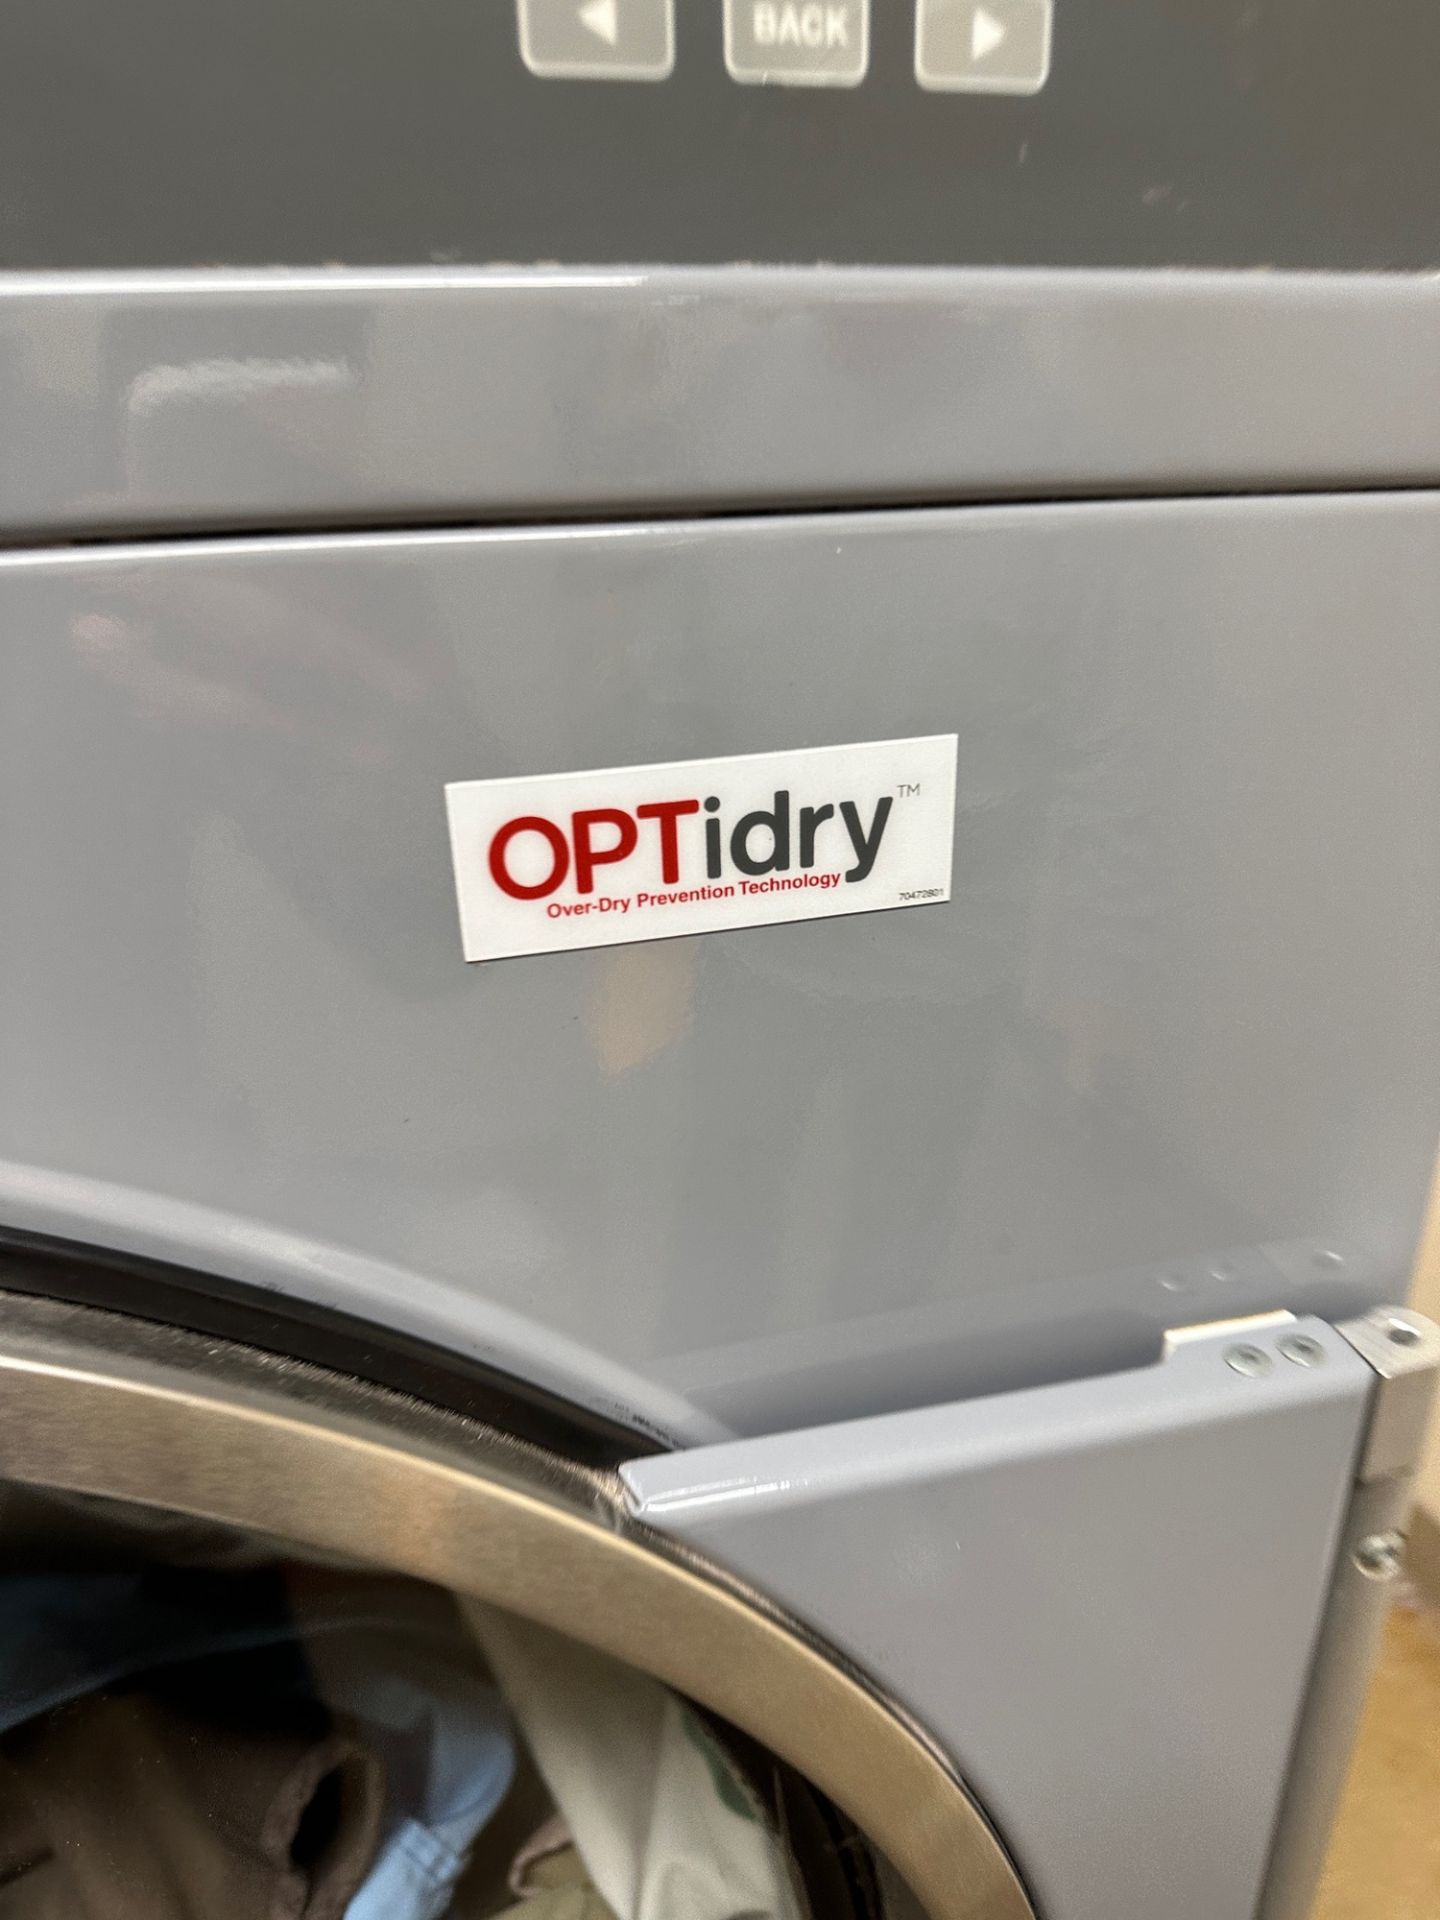 Daniels OptiDry Industrial Clothes Dryer & UniMac Industrial Clothes Washer | Rig Fee $200 - Image 2 of 6